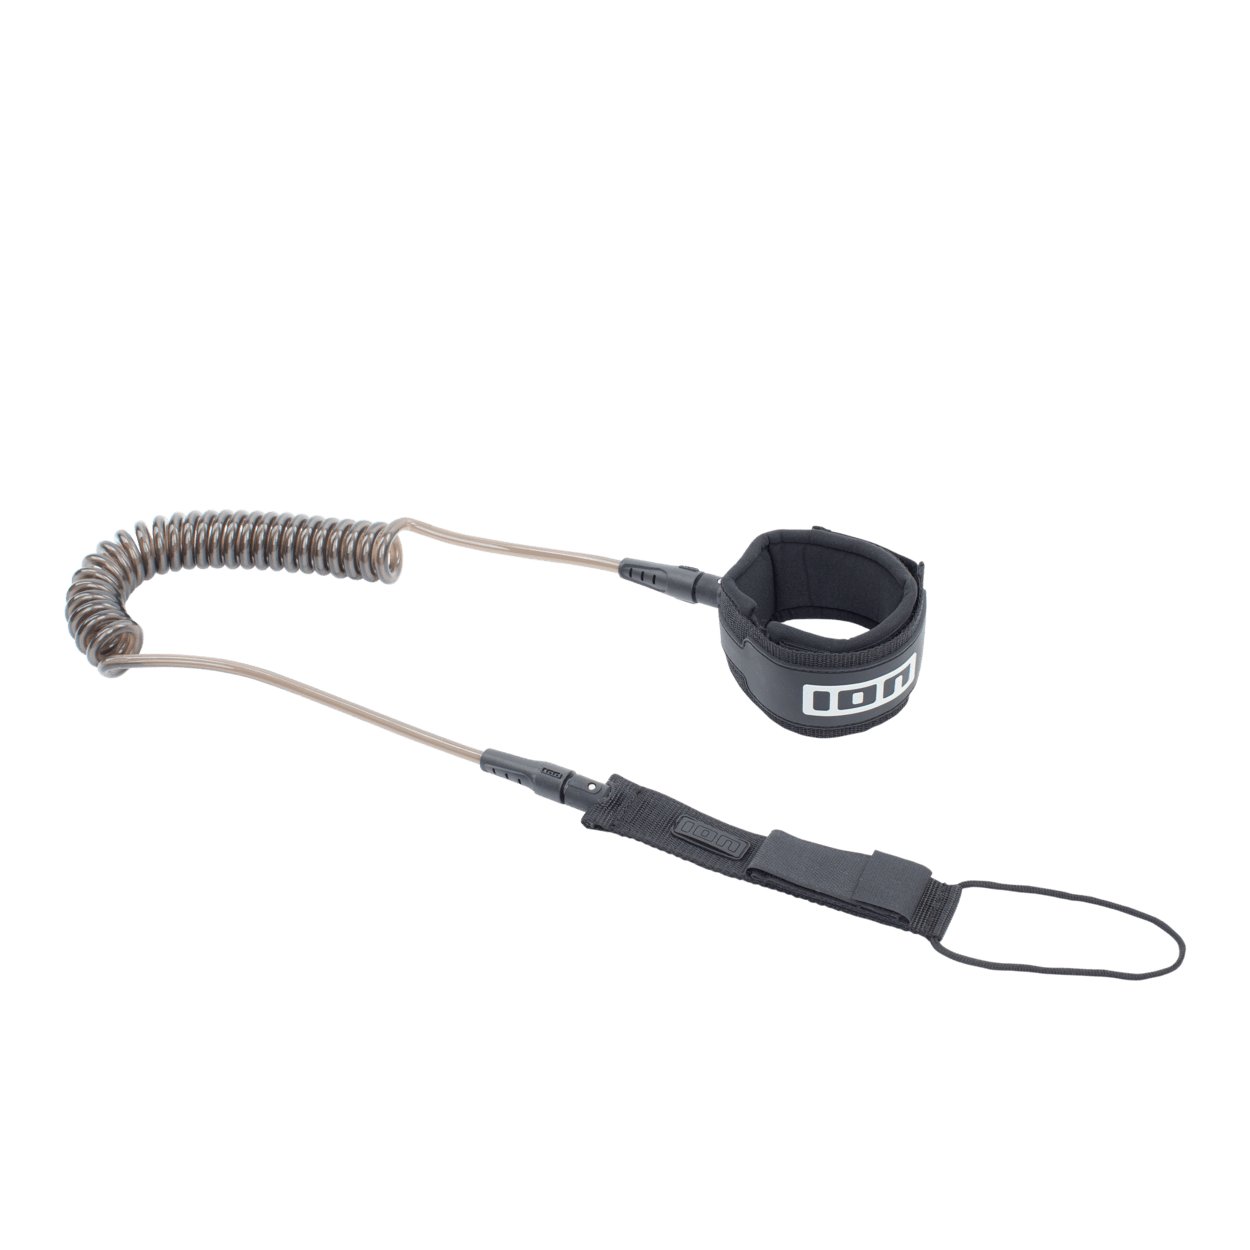 ION SUP Leash Core Coiled Ankle 2022 - Worthing Watersports - 9008415964888 - Accessories - ION Water